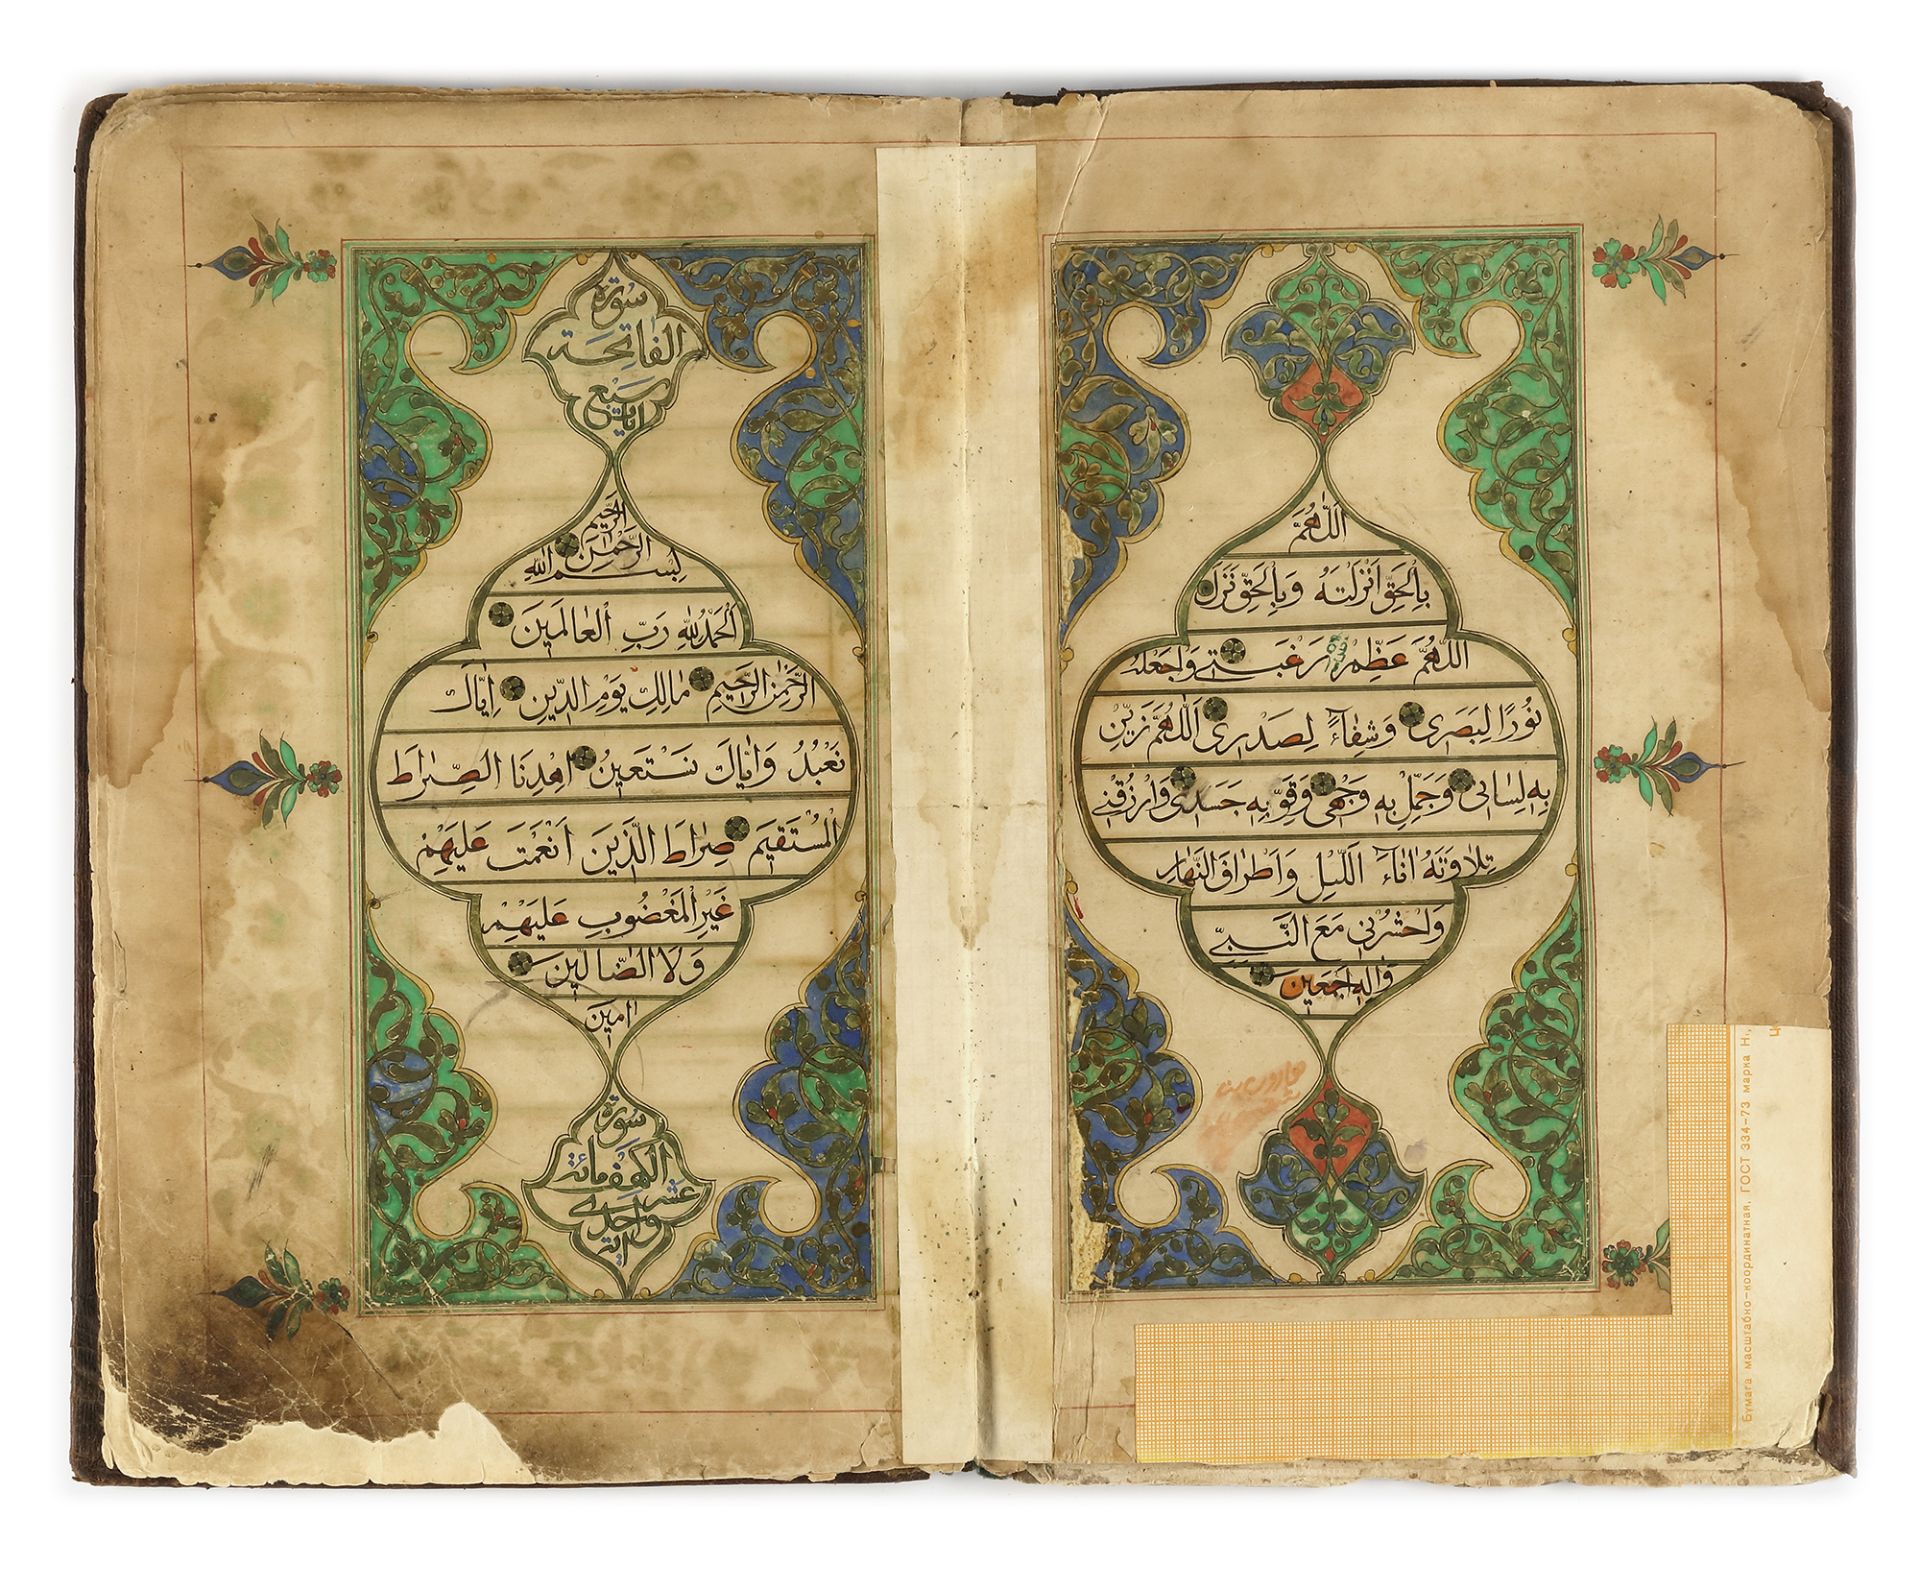 A QURAN SECTION, WRITTEN BY AL-HAJJ IBN KHUDR AL-KASHANI, CENTRAL ASIA, 19TH CENTURY - Image 2 of 3